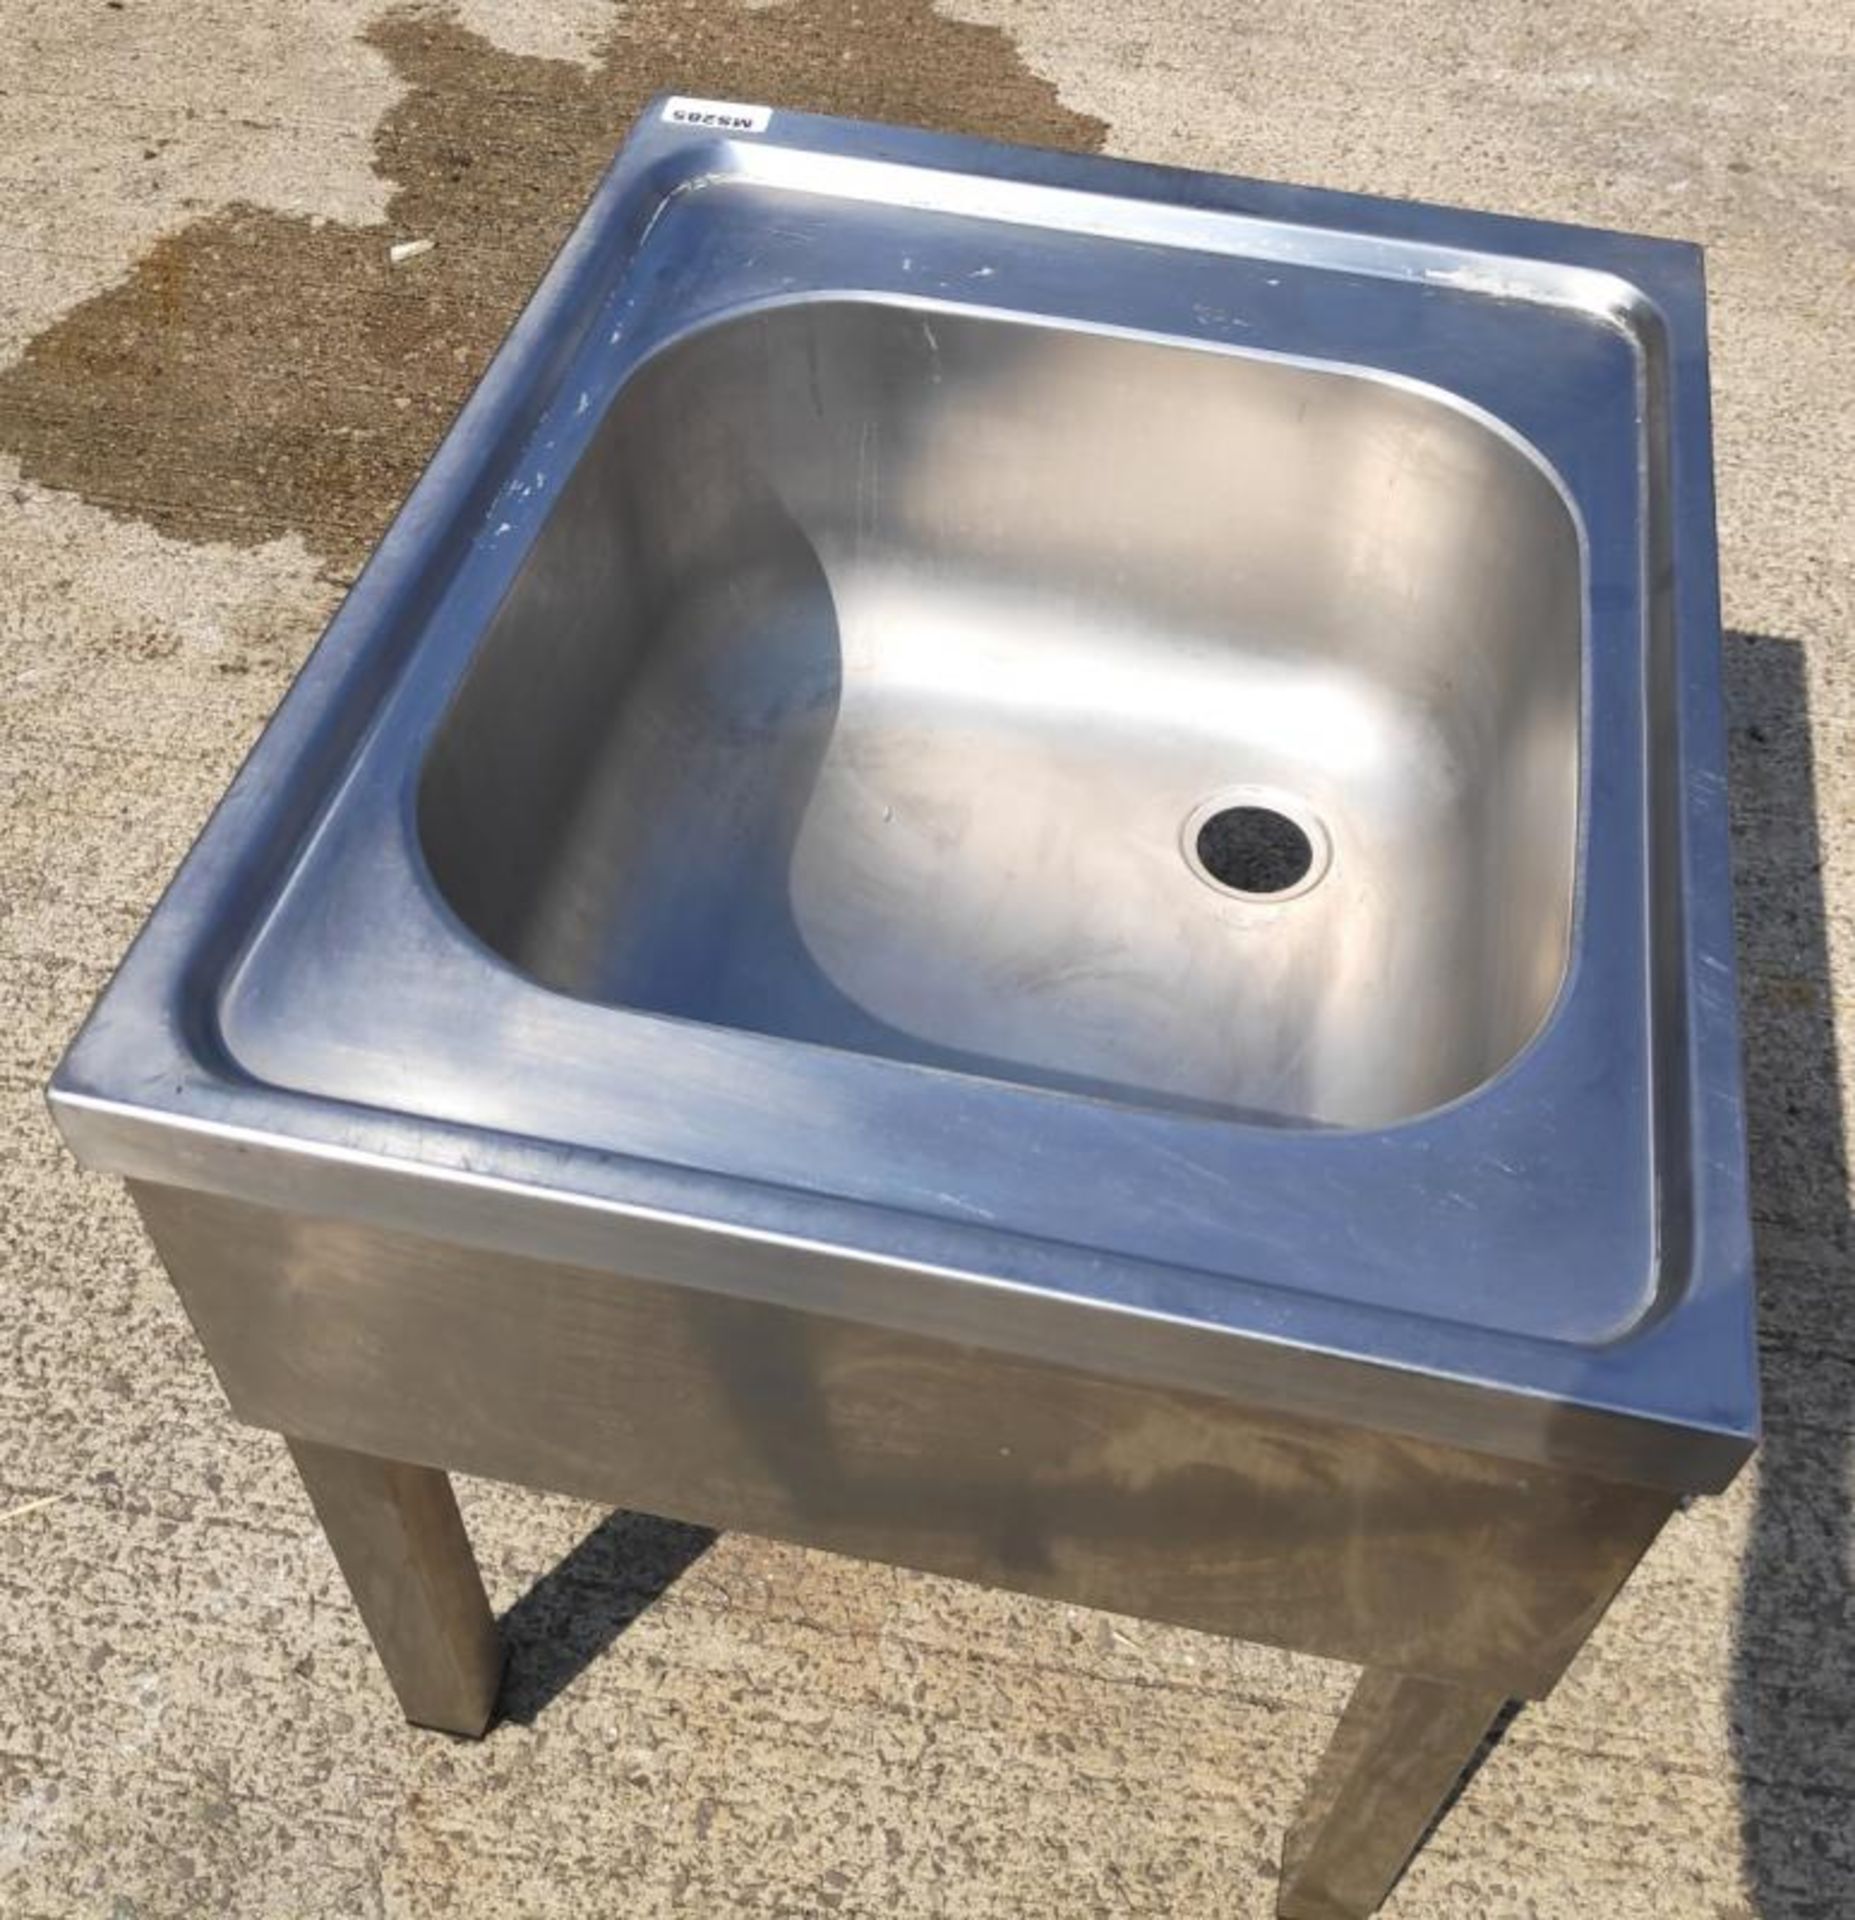 1 x Low Stainless Steel Commercial Kitchen Sink Unit - Dimensions: 50W x 60D x 60H cm - Very Recentl - Image 5 of 6